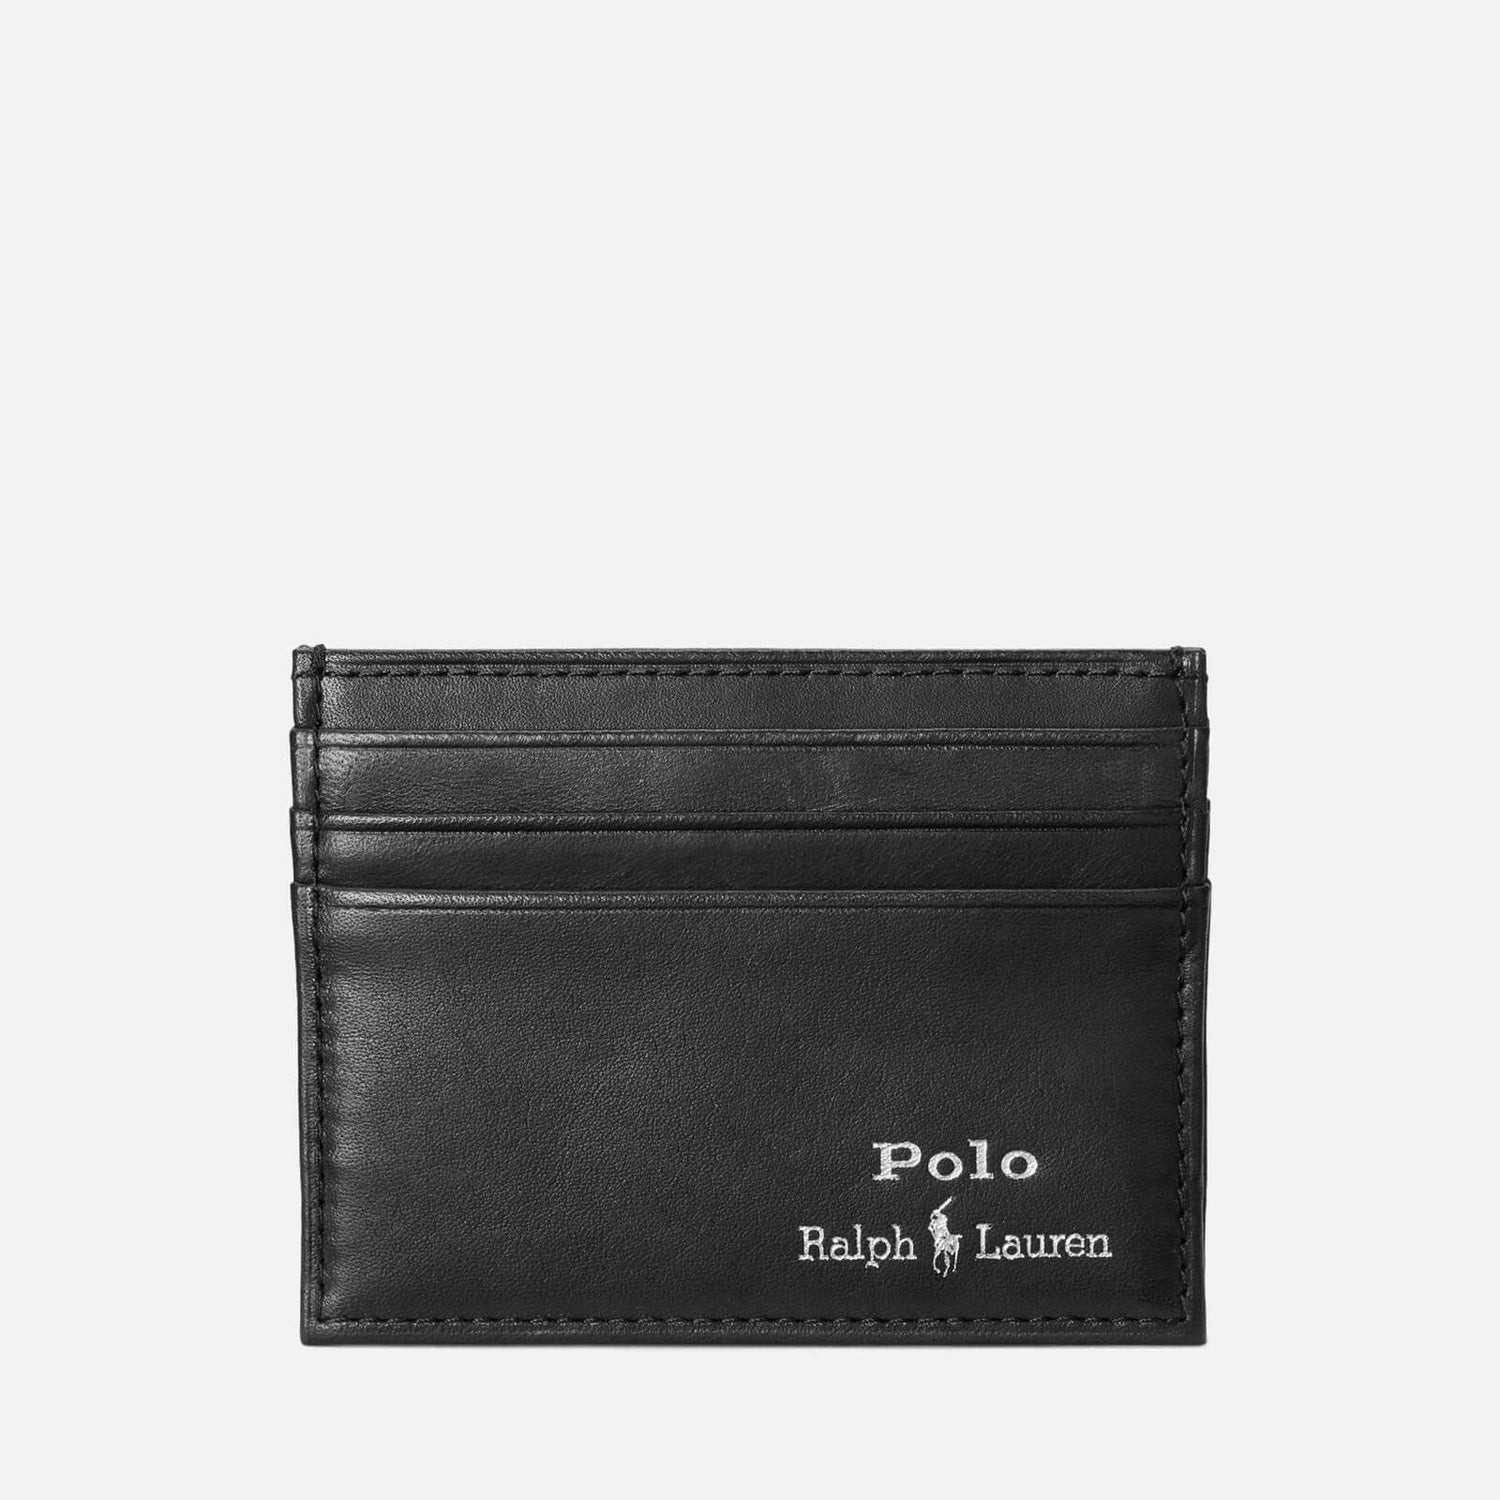 Polo Ralph Lauren Men's Smooth Leather Card Case - Black